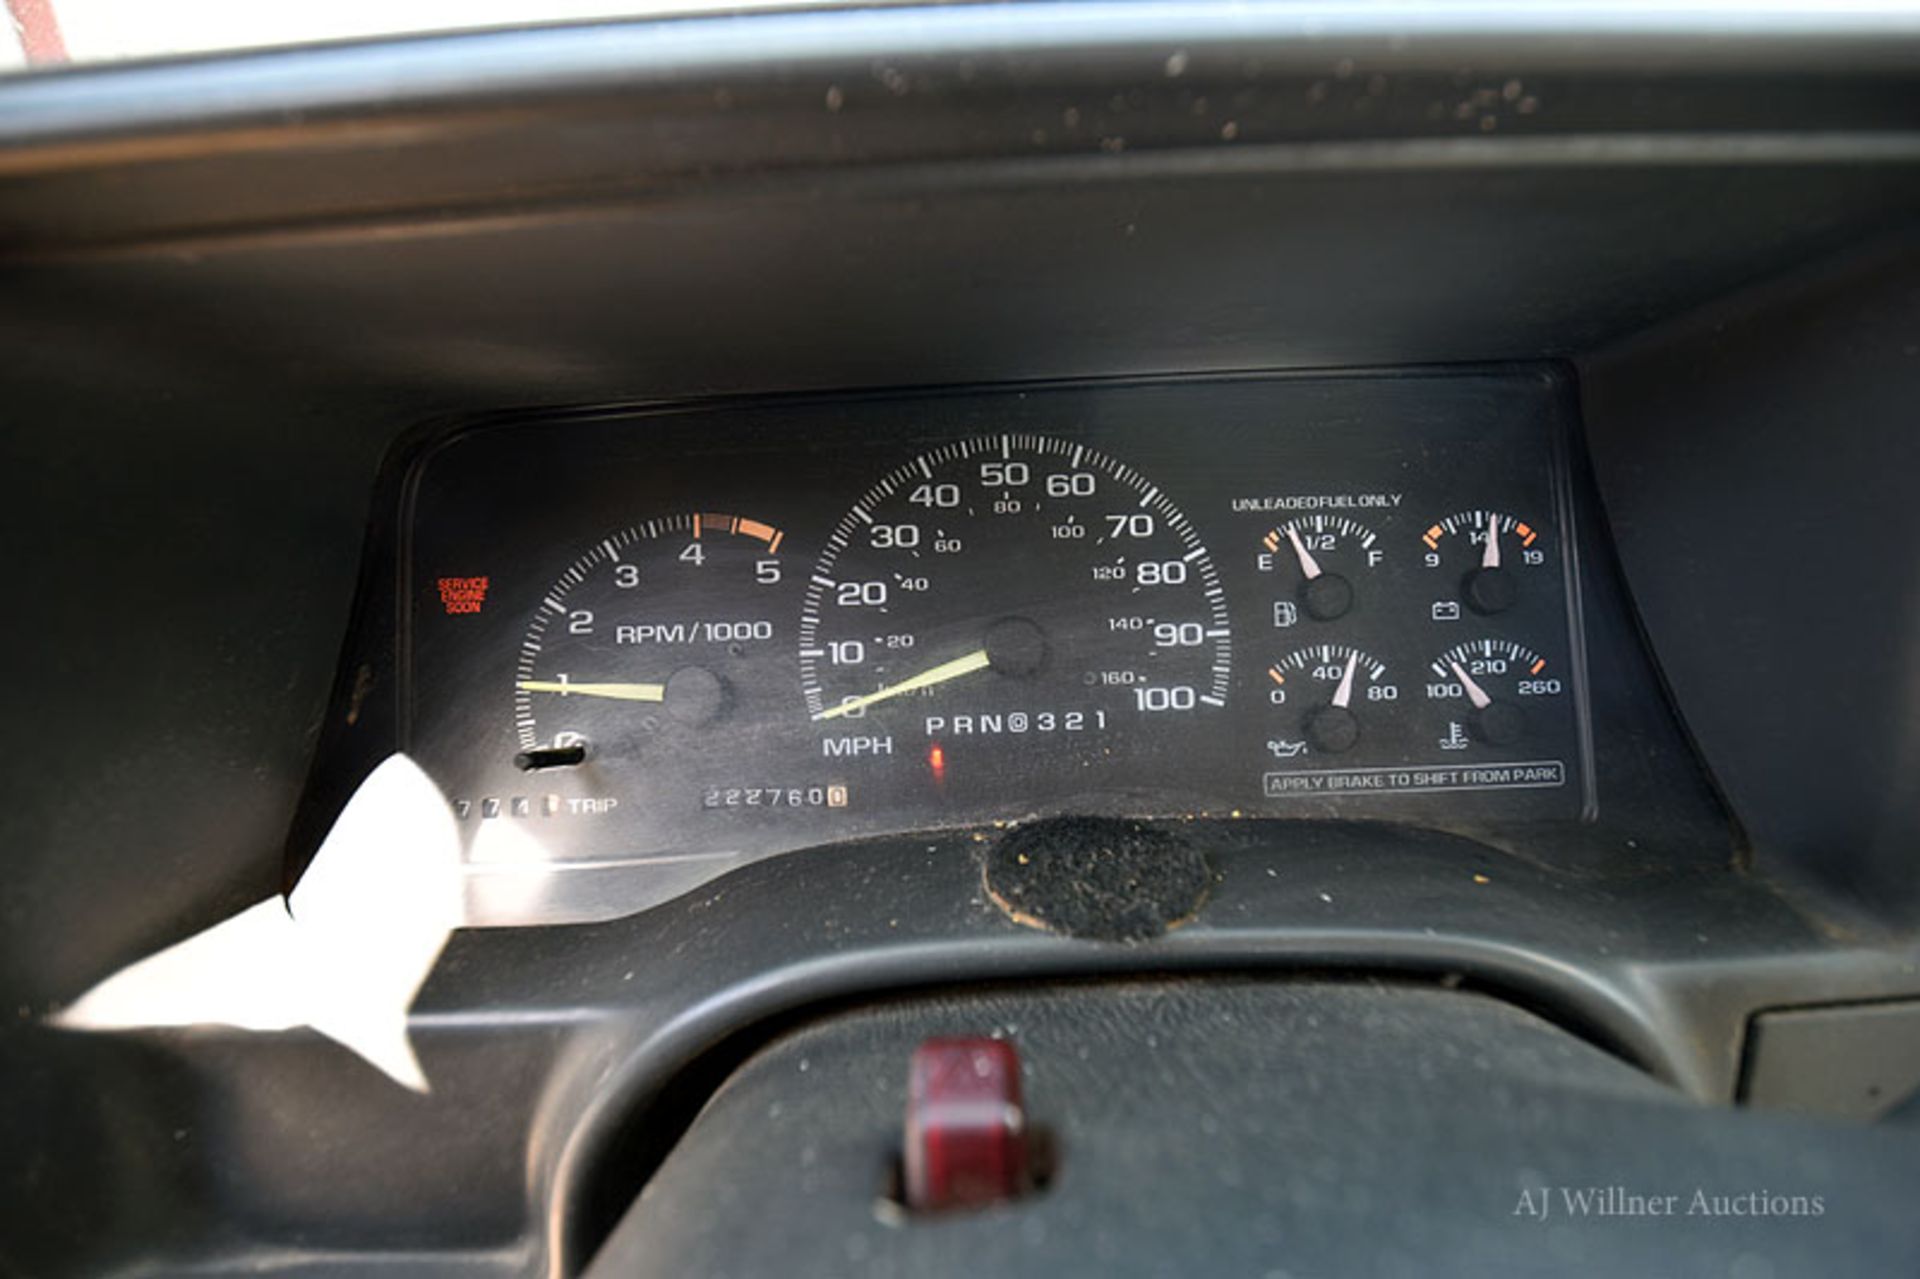 1995 Chevrolet 3500 Utility TruckVIN: 1GBGC34K2SE159122Miles: 222,760 Indicated On Odometer8' Bed - Image 6 of 7